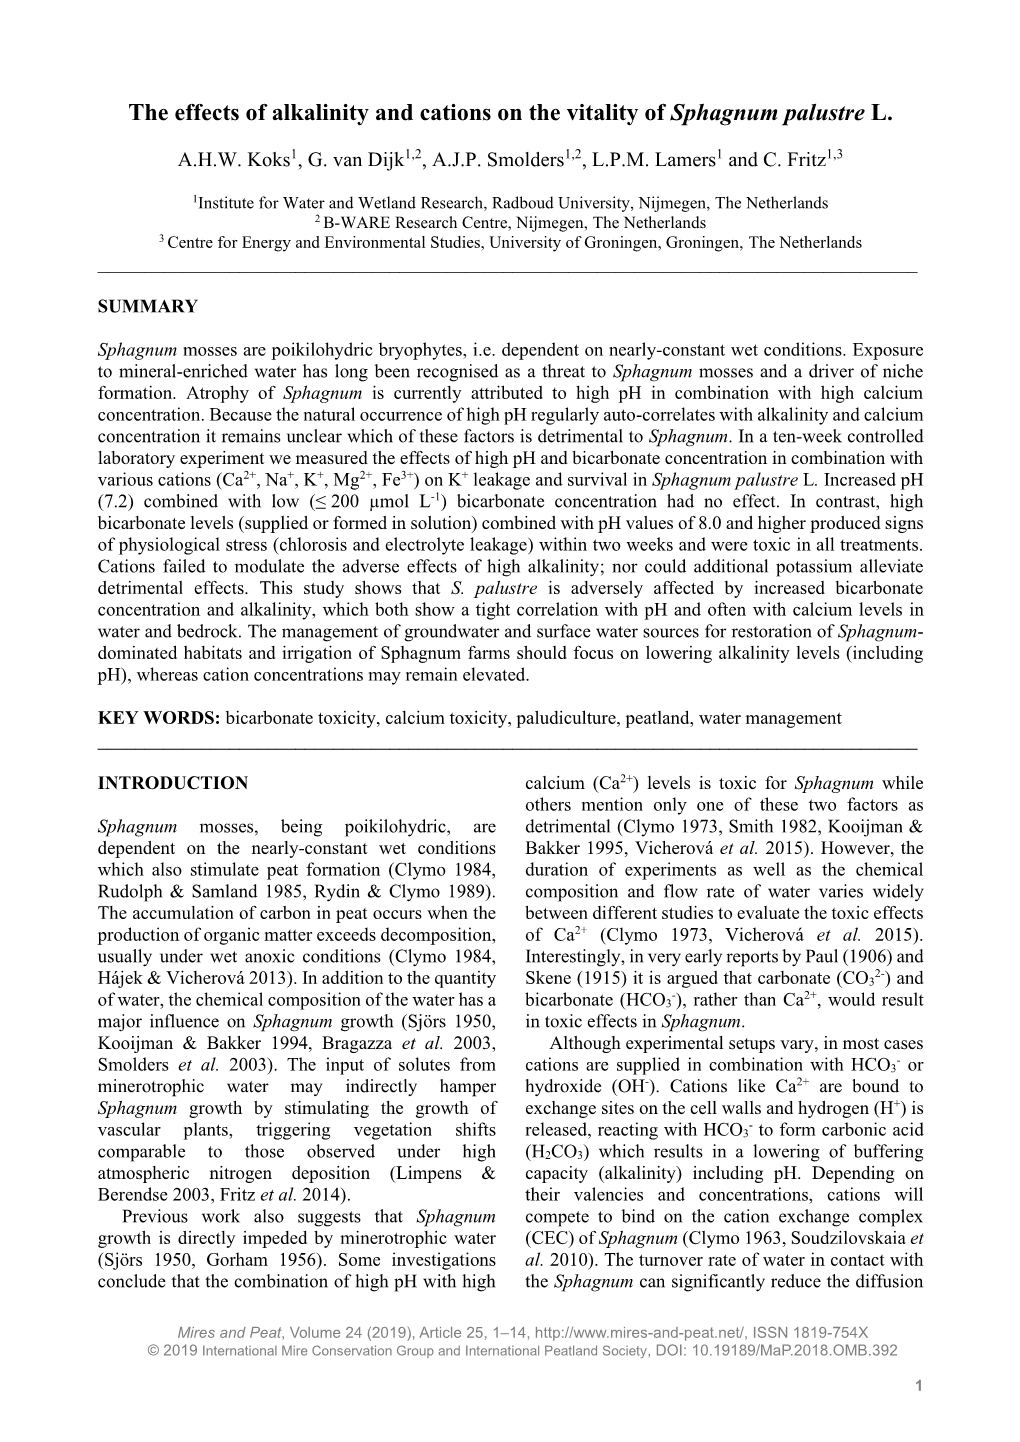 The Effects of Alkalinity and Cations on the Vitality of Sphagnum Palustre L